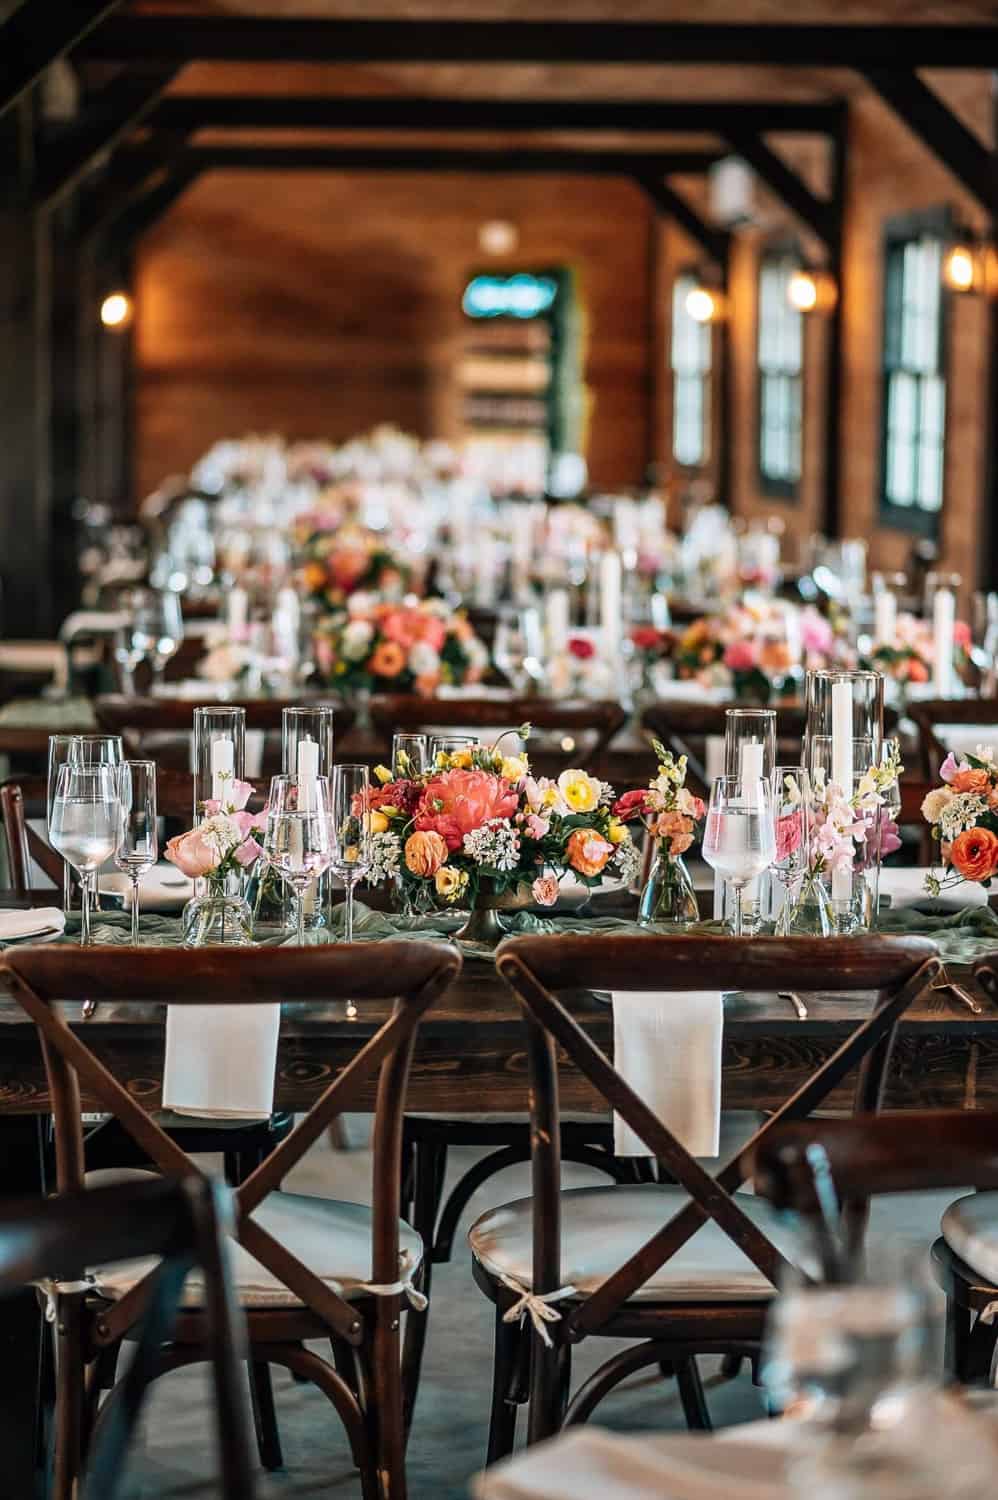 Elegant reception setup in a rustic venue with wooden beams, and long tables with floral centerpieces and glassware.